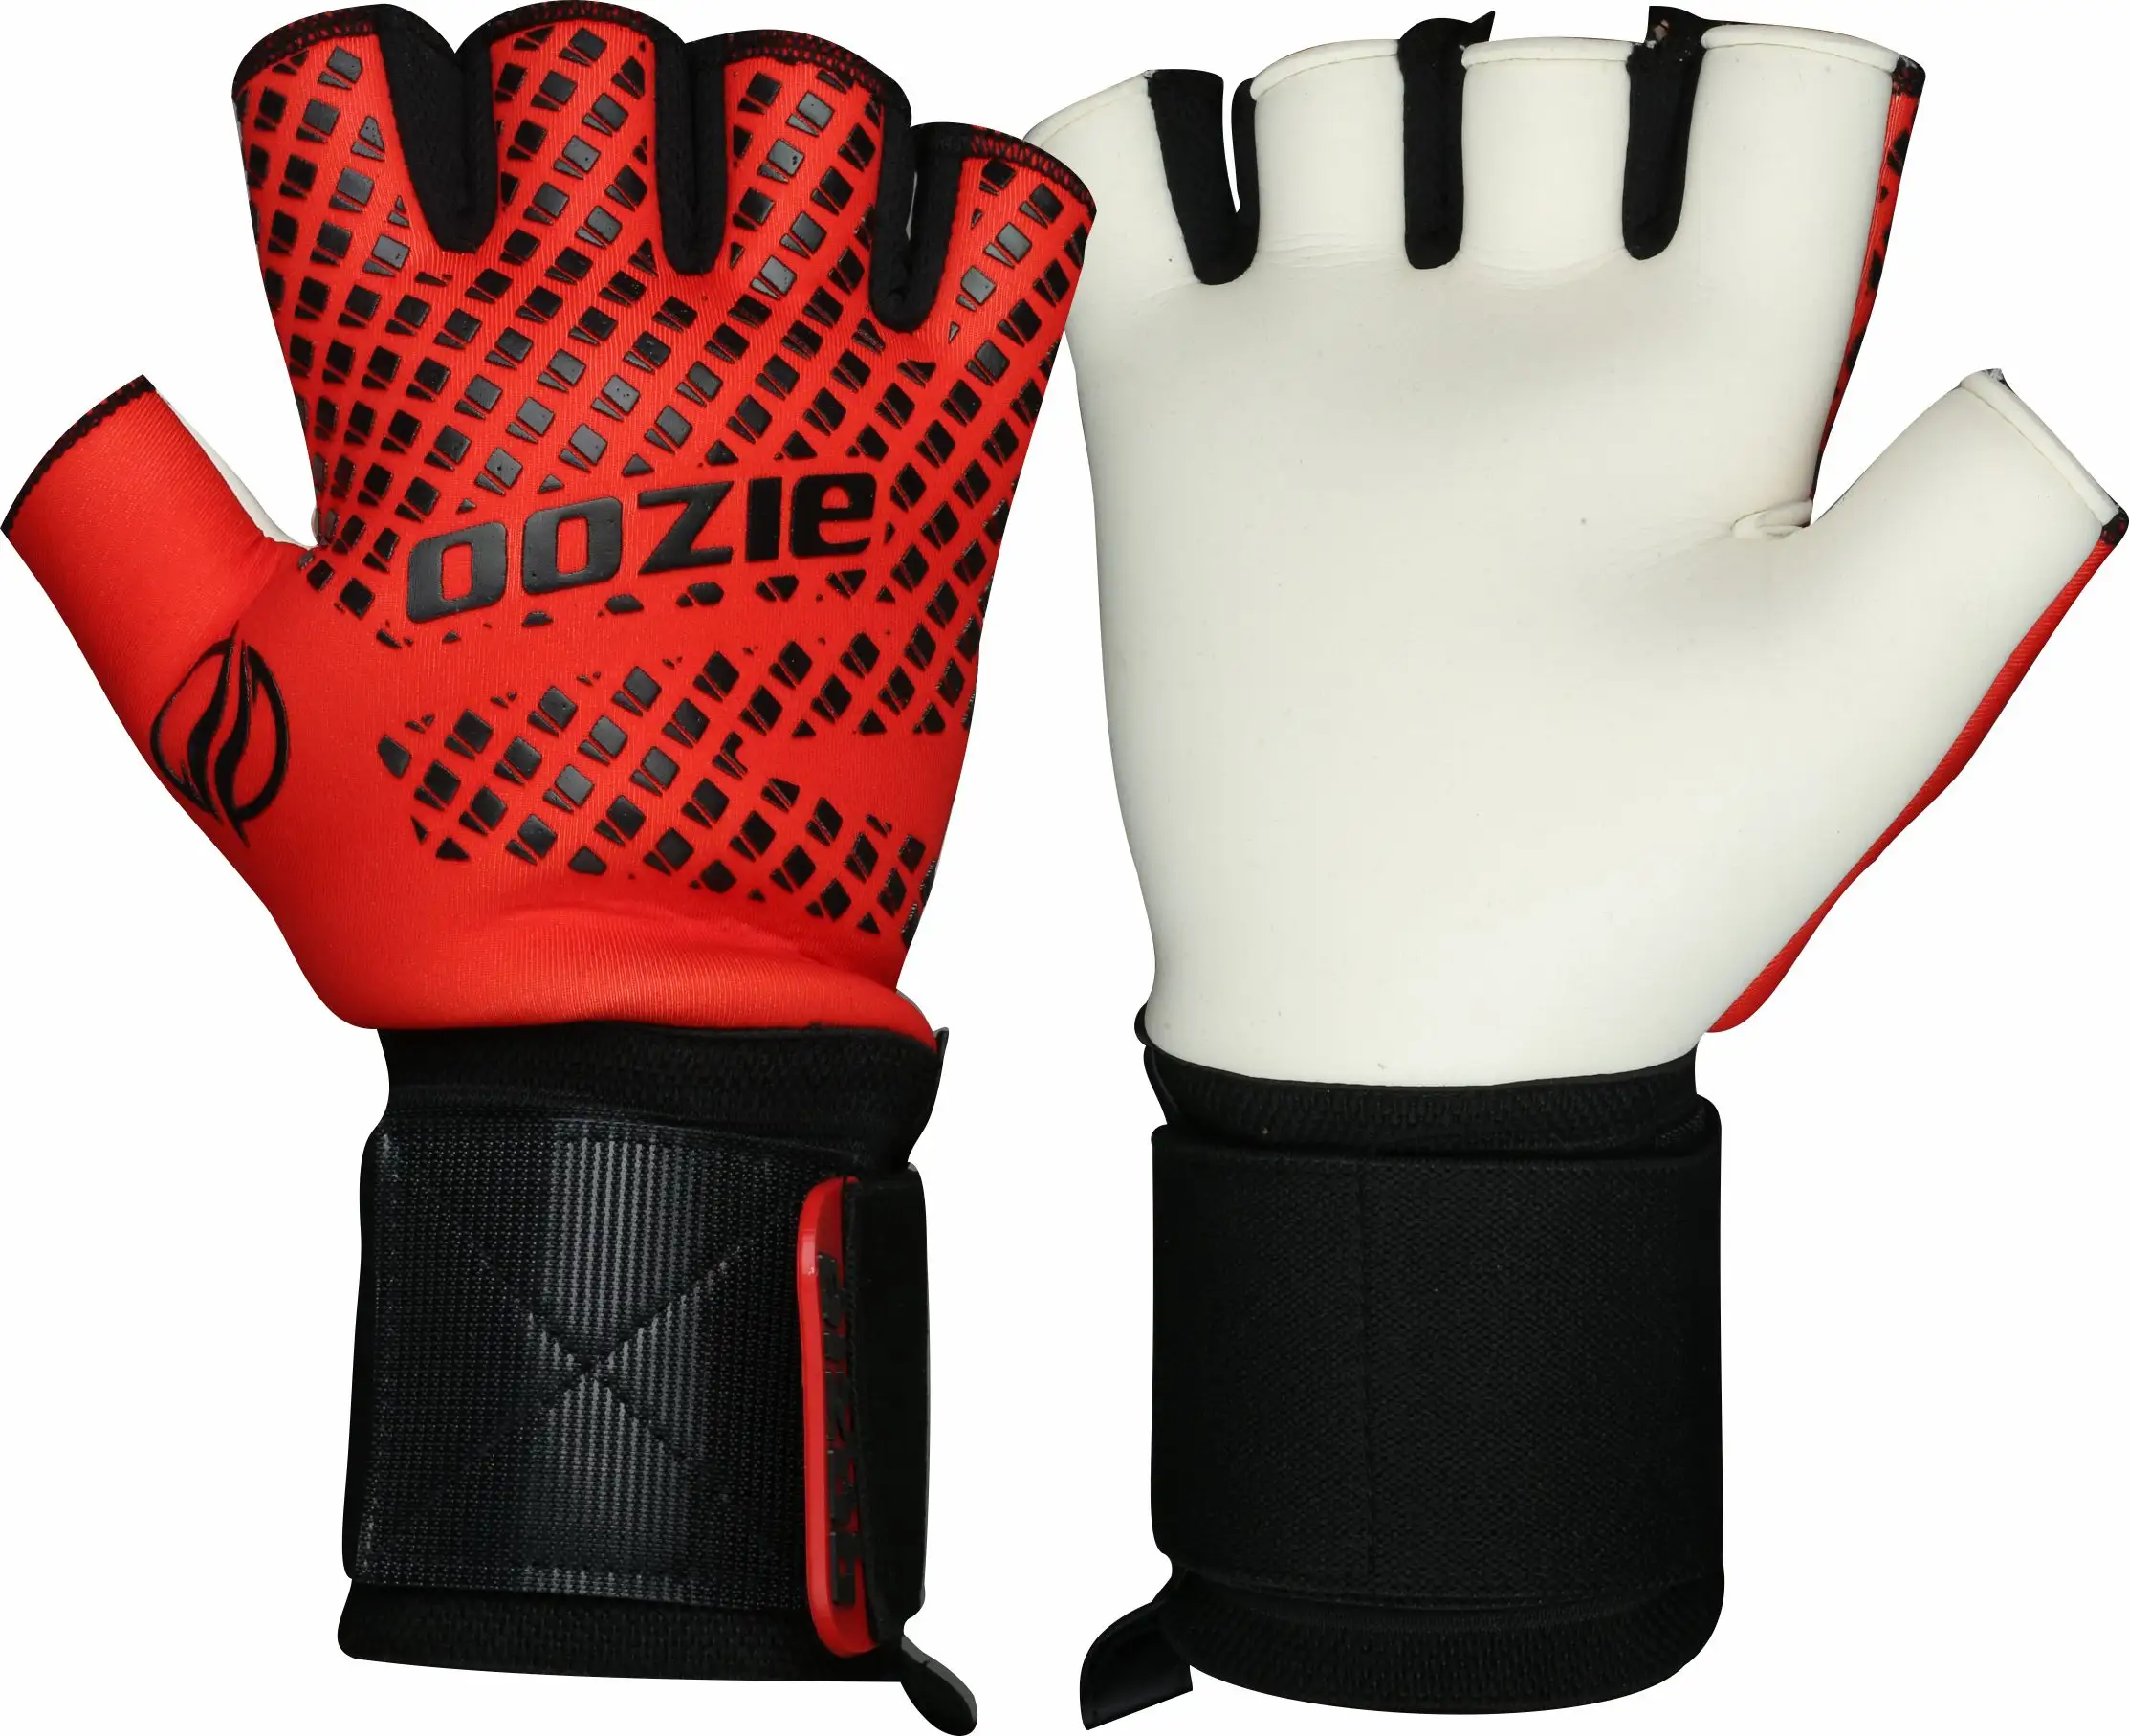 Futsal gloves Made of New Basic German Latex Foam breathable tight Fit for player hand and easy to grip the football